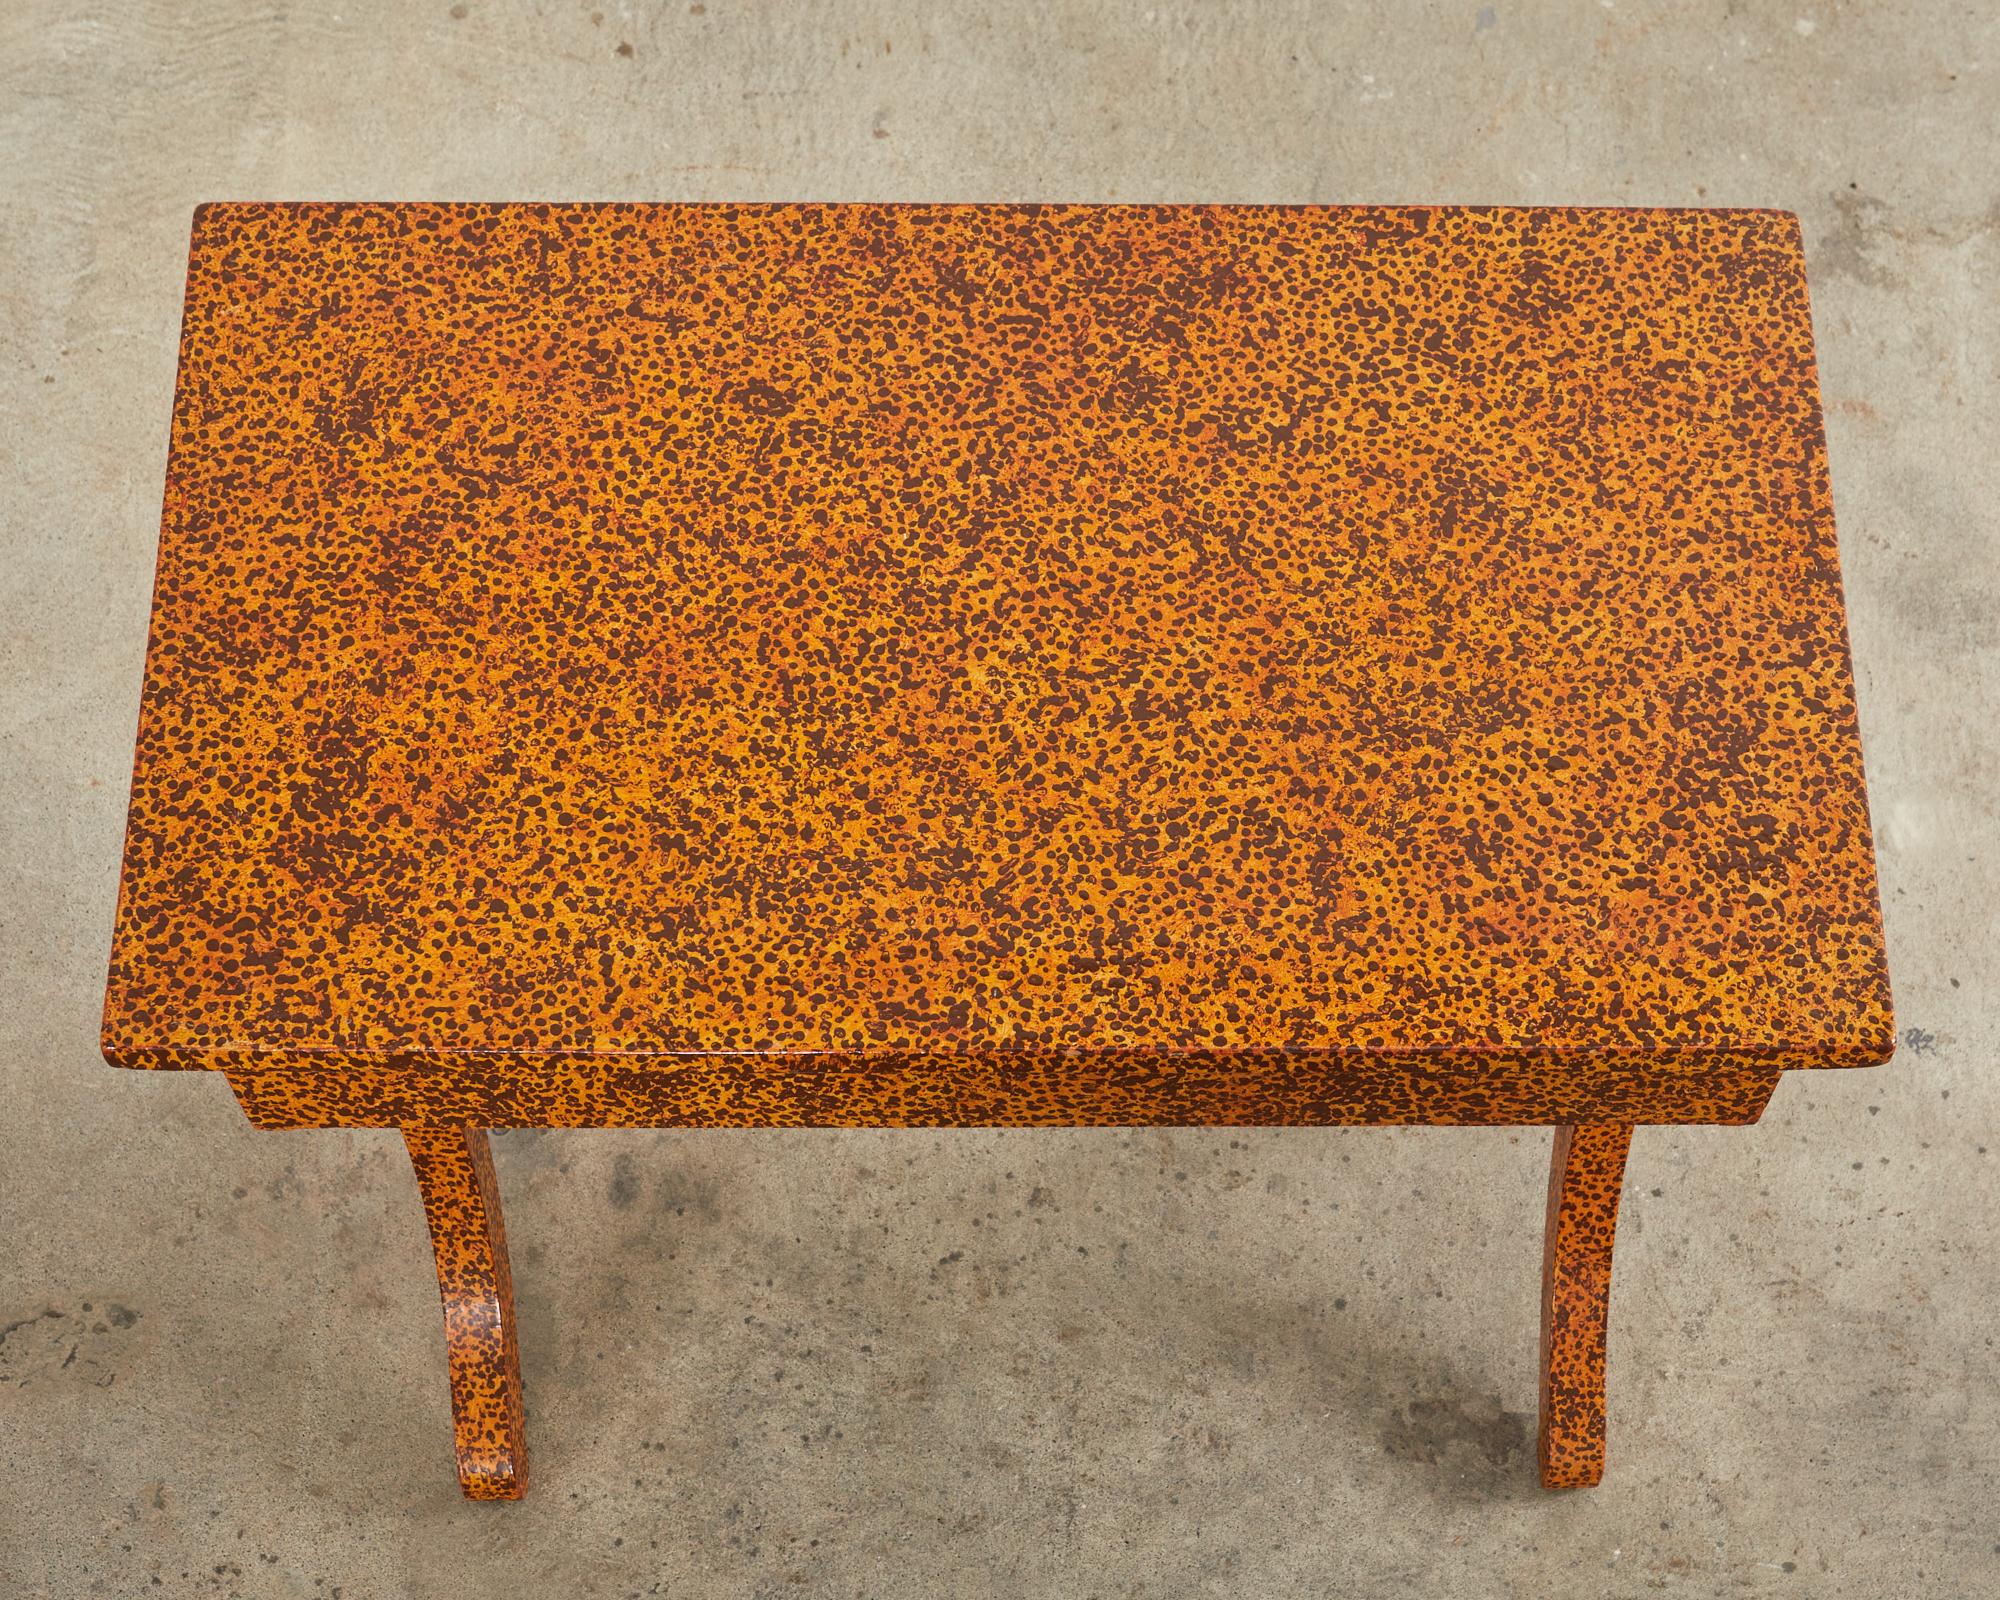 English Regency Style Table Lacquer Speckled by Artist Ira Yeager In Good Condition For Sale In Rio Vista, CA